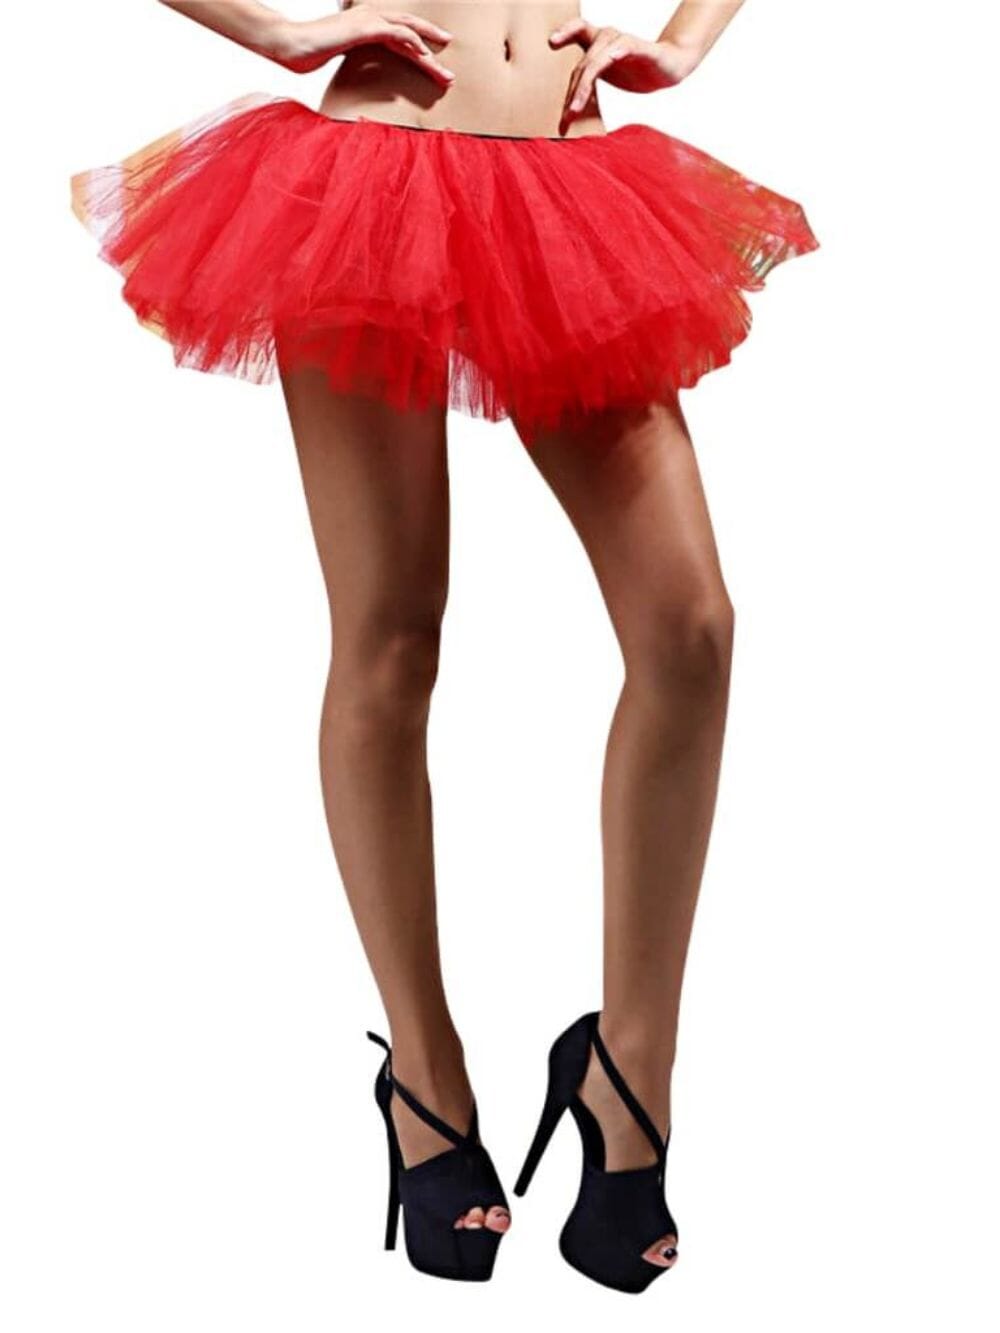 Red - 5 Layer Tutu Skirt for Running, Dress-Up, Costumes - Sydney So Sweet